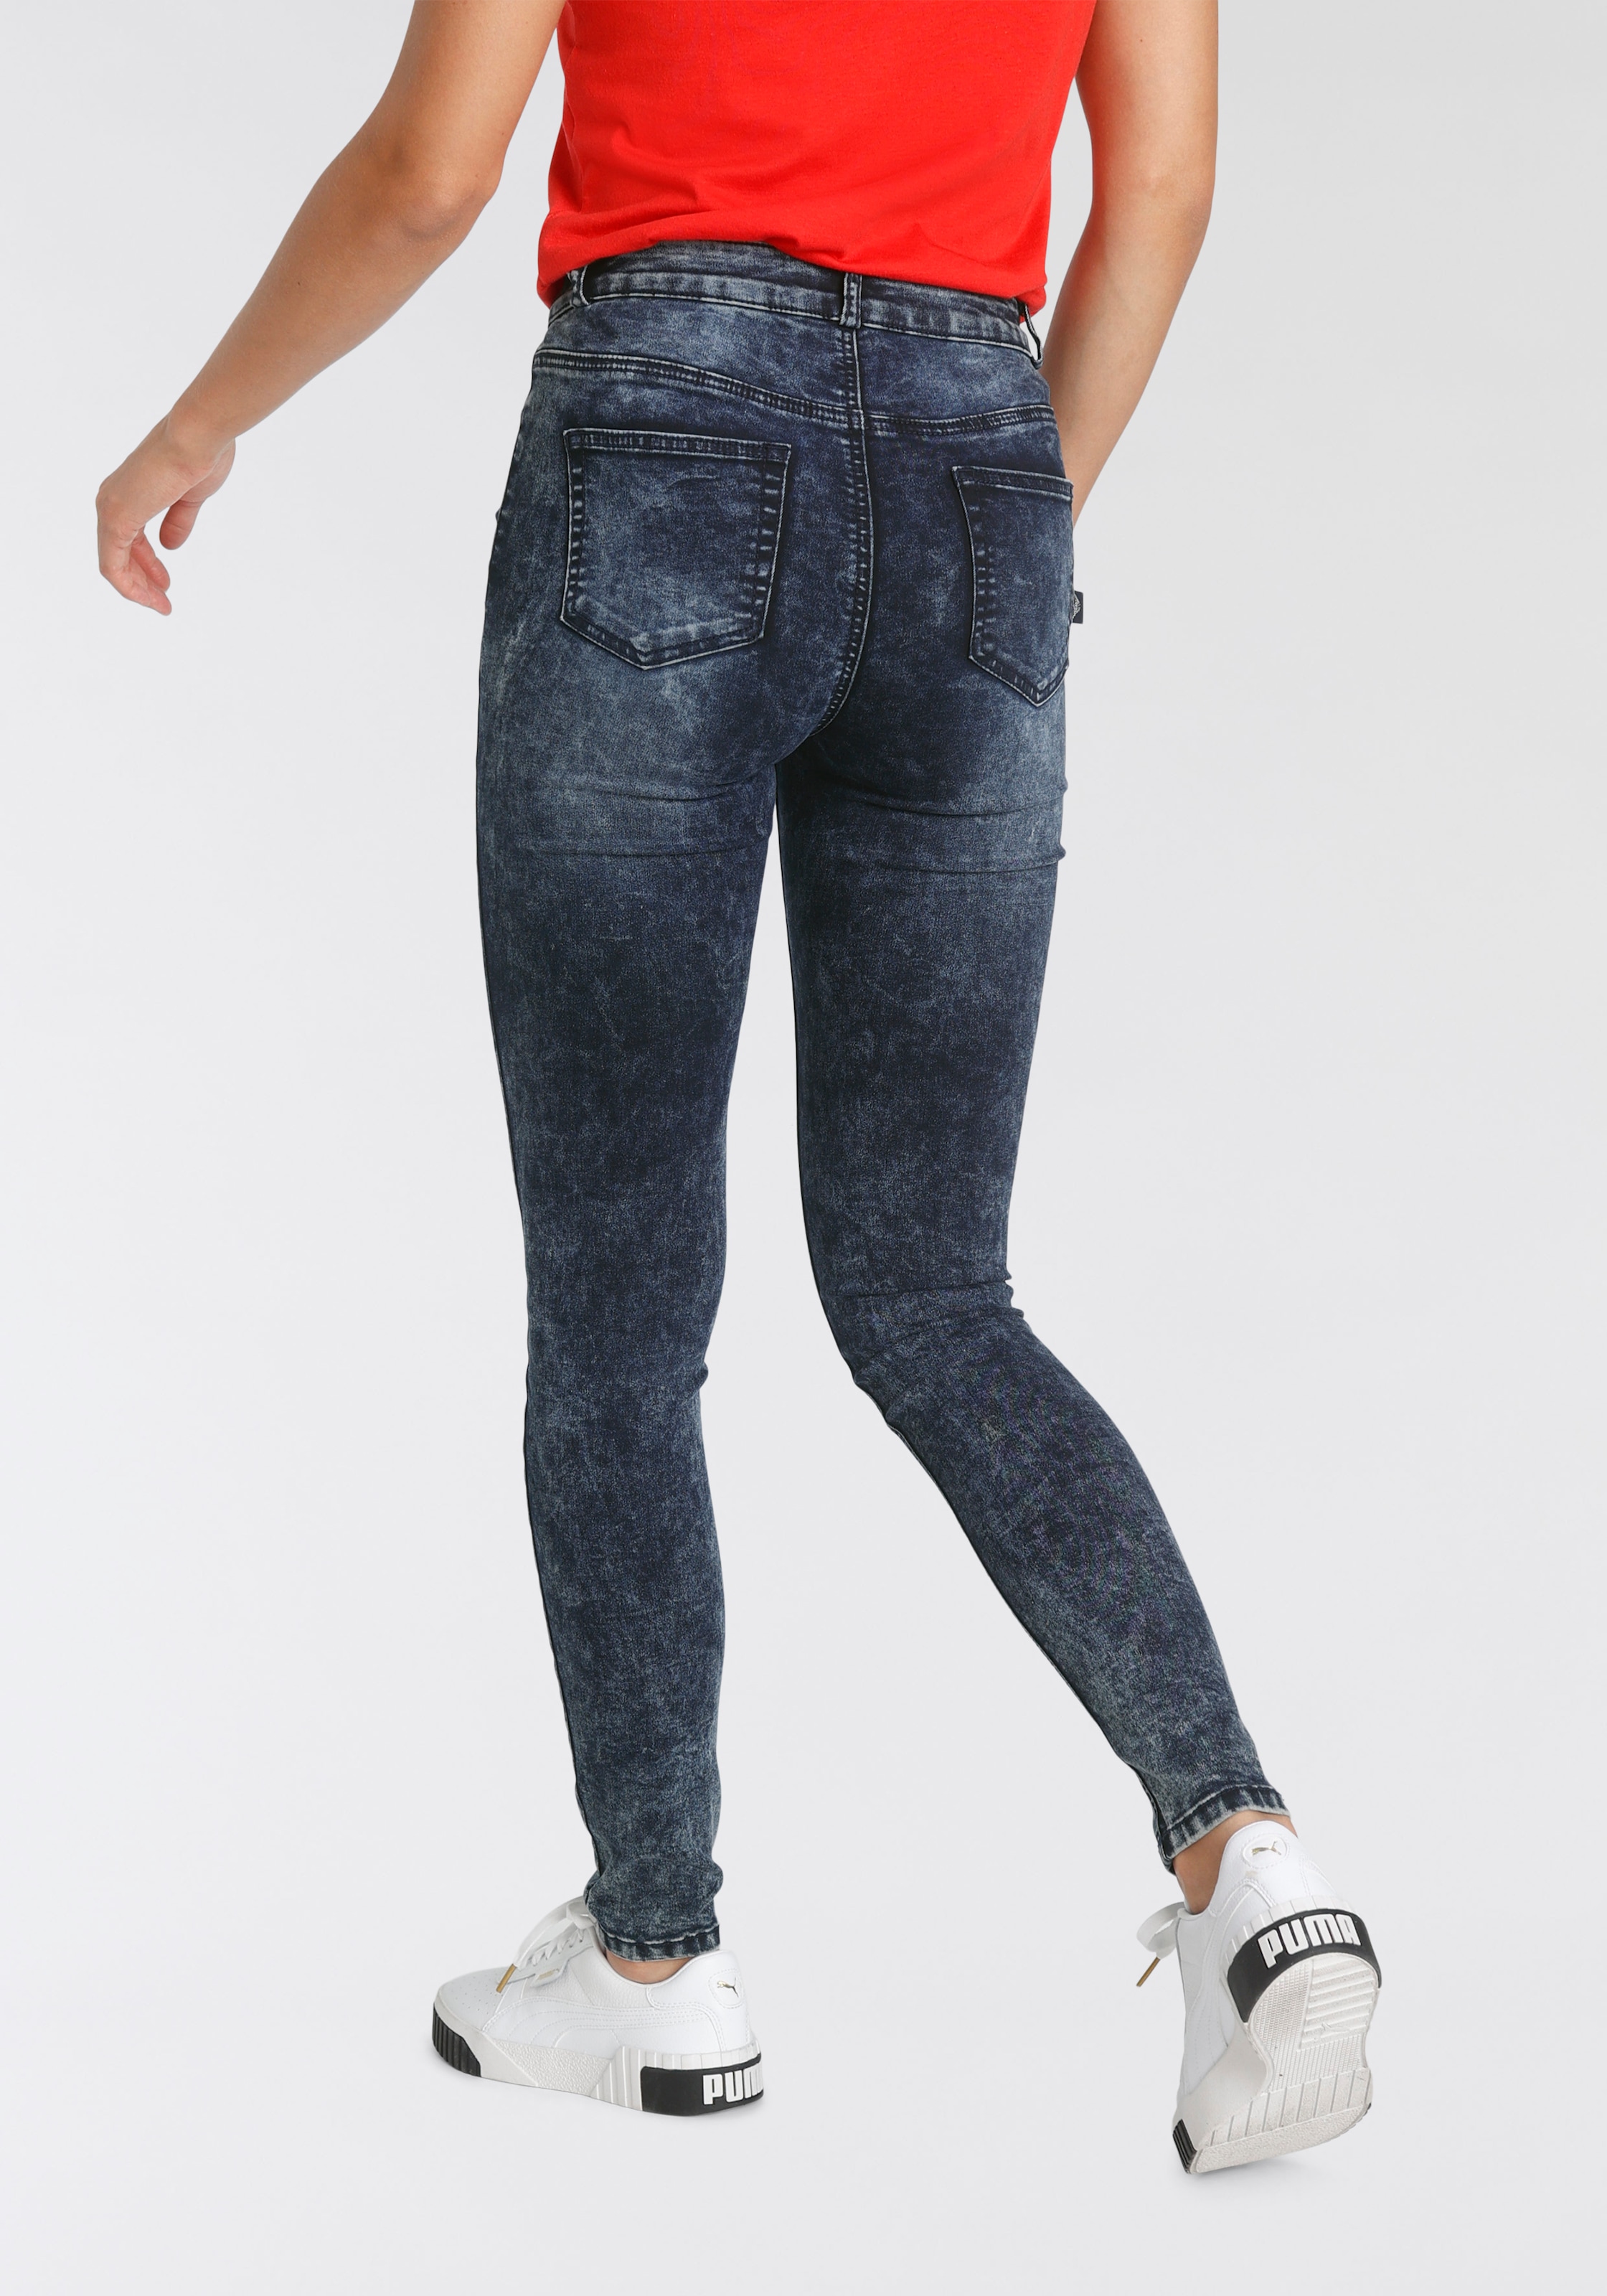 Arizona Moonwashed Stretch kaufen moon online »Ultra Skinny-fit-Jeans Jeans washed«,